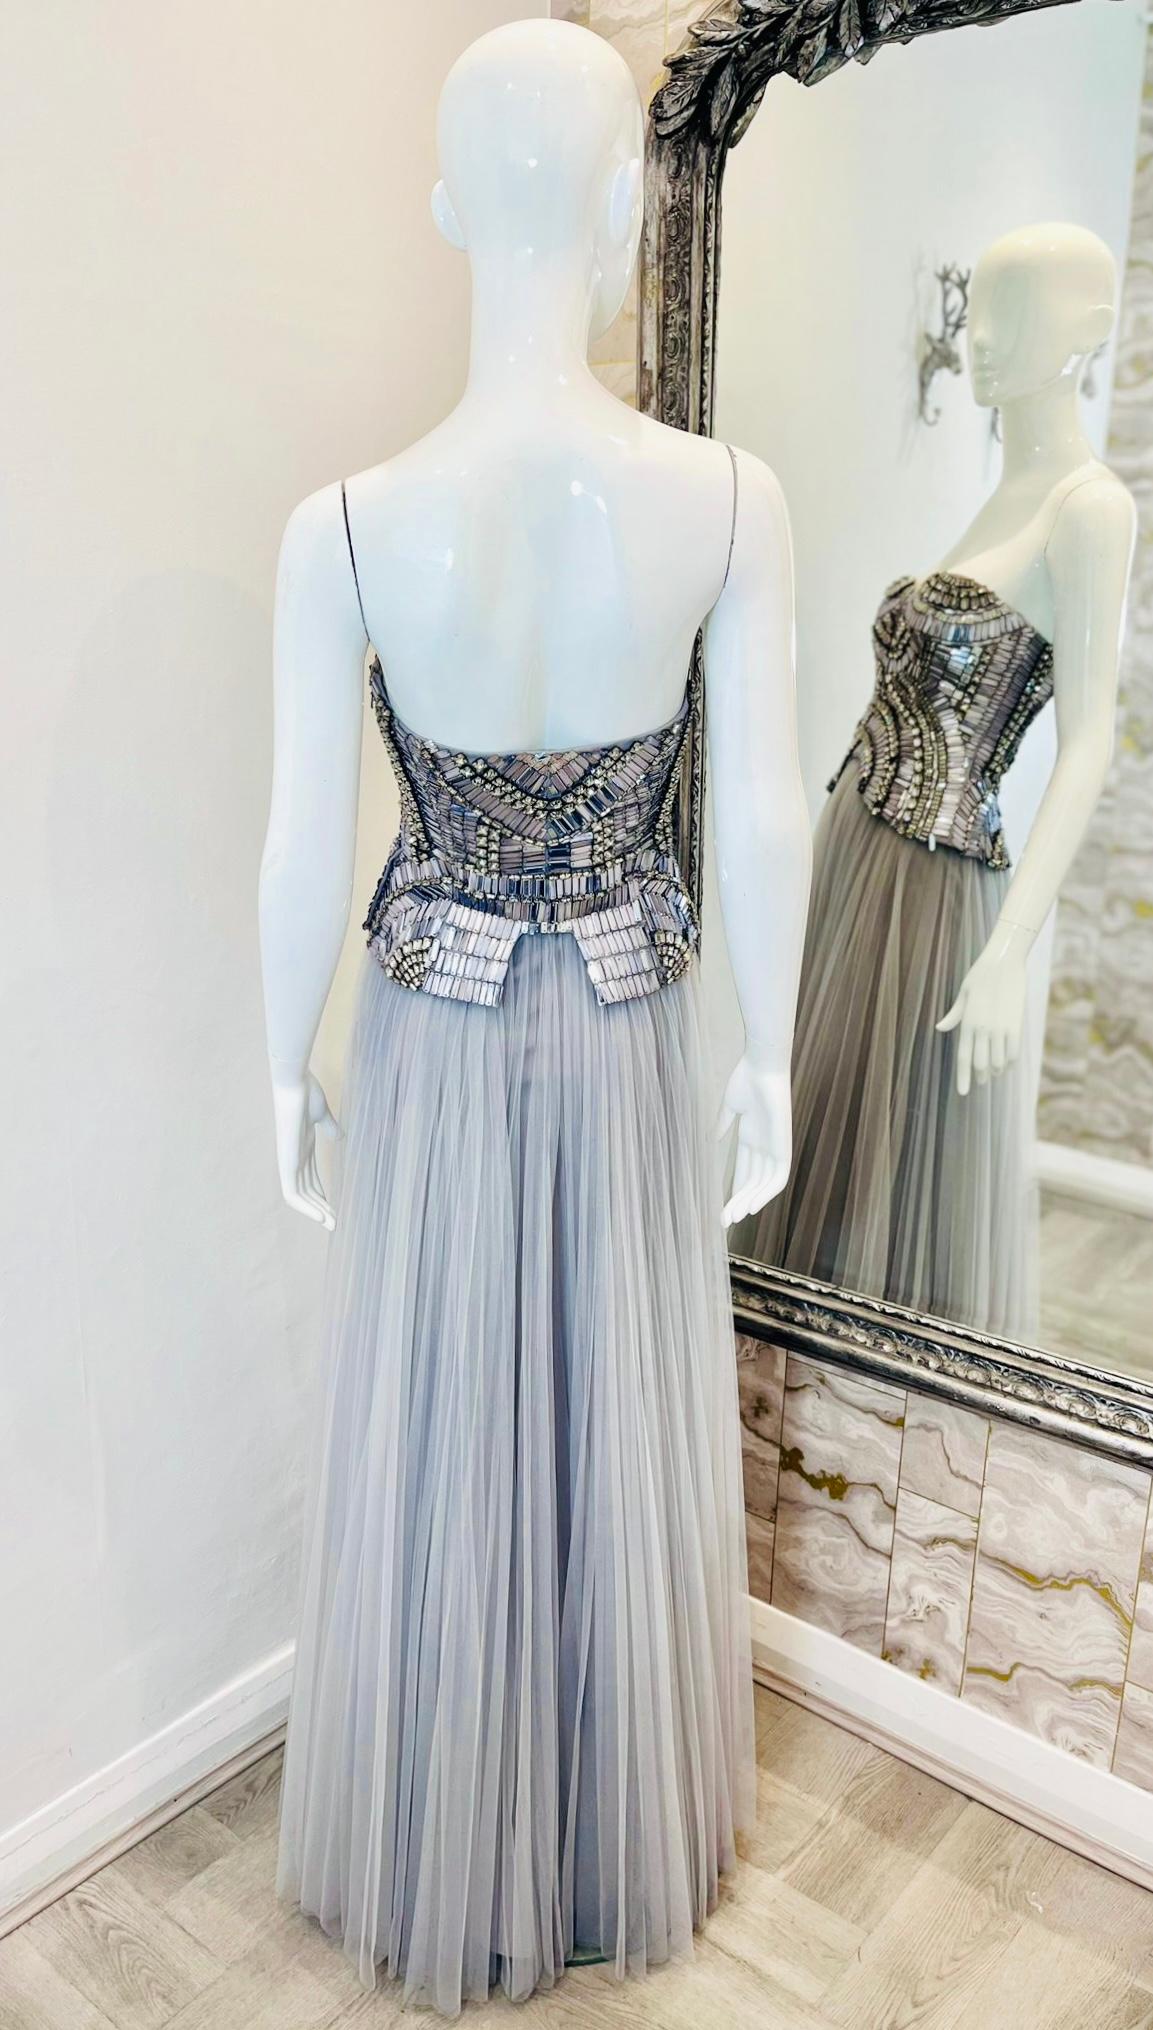 Women's Alberta Ferretti Limited Edition Crystal & Bead Tulle Gown